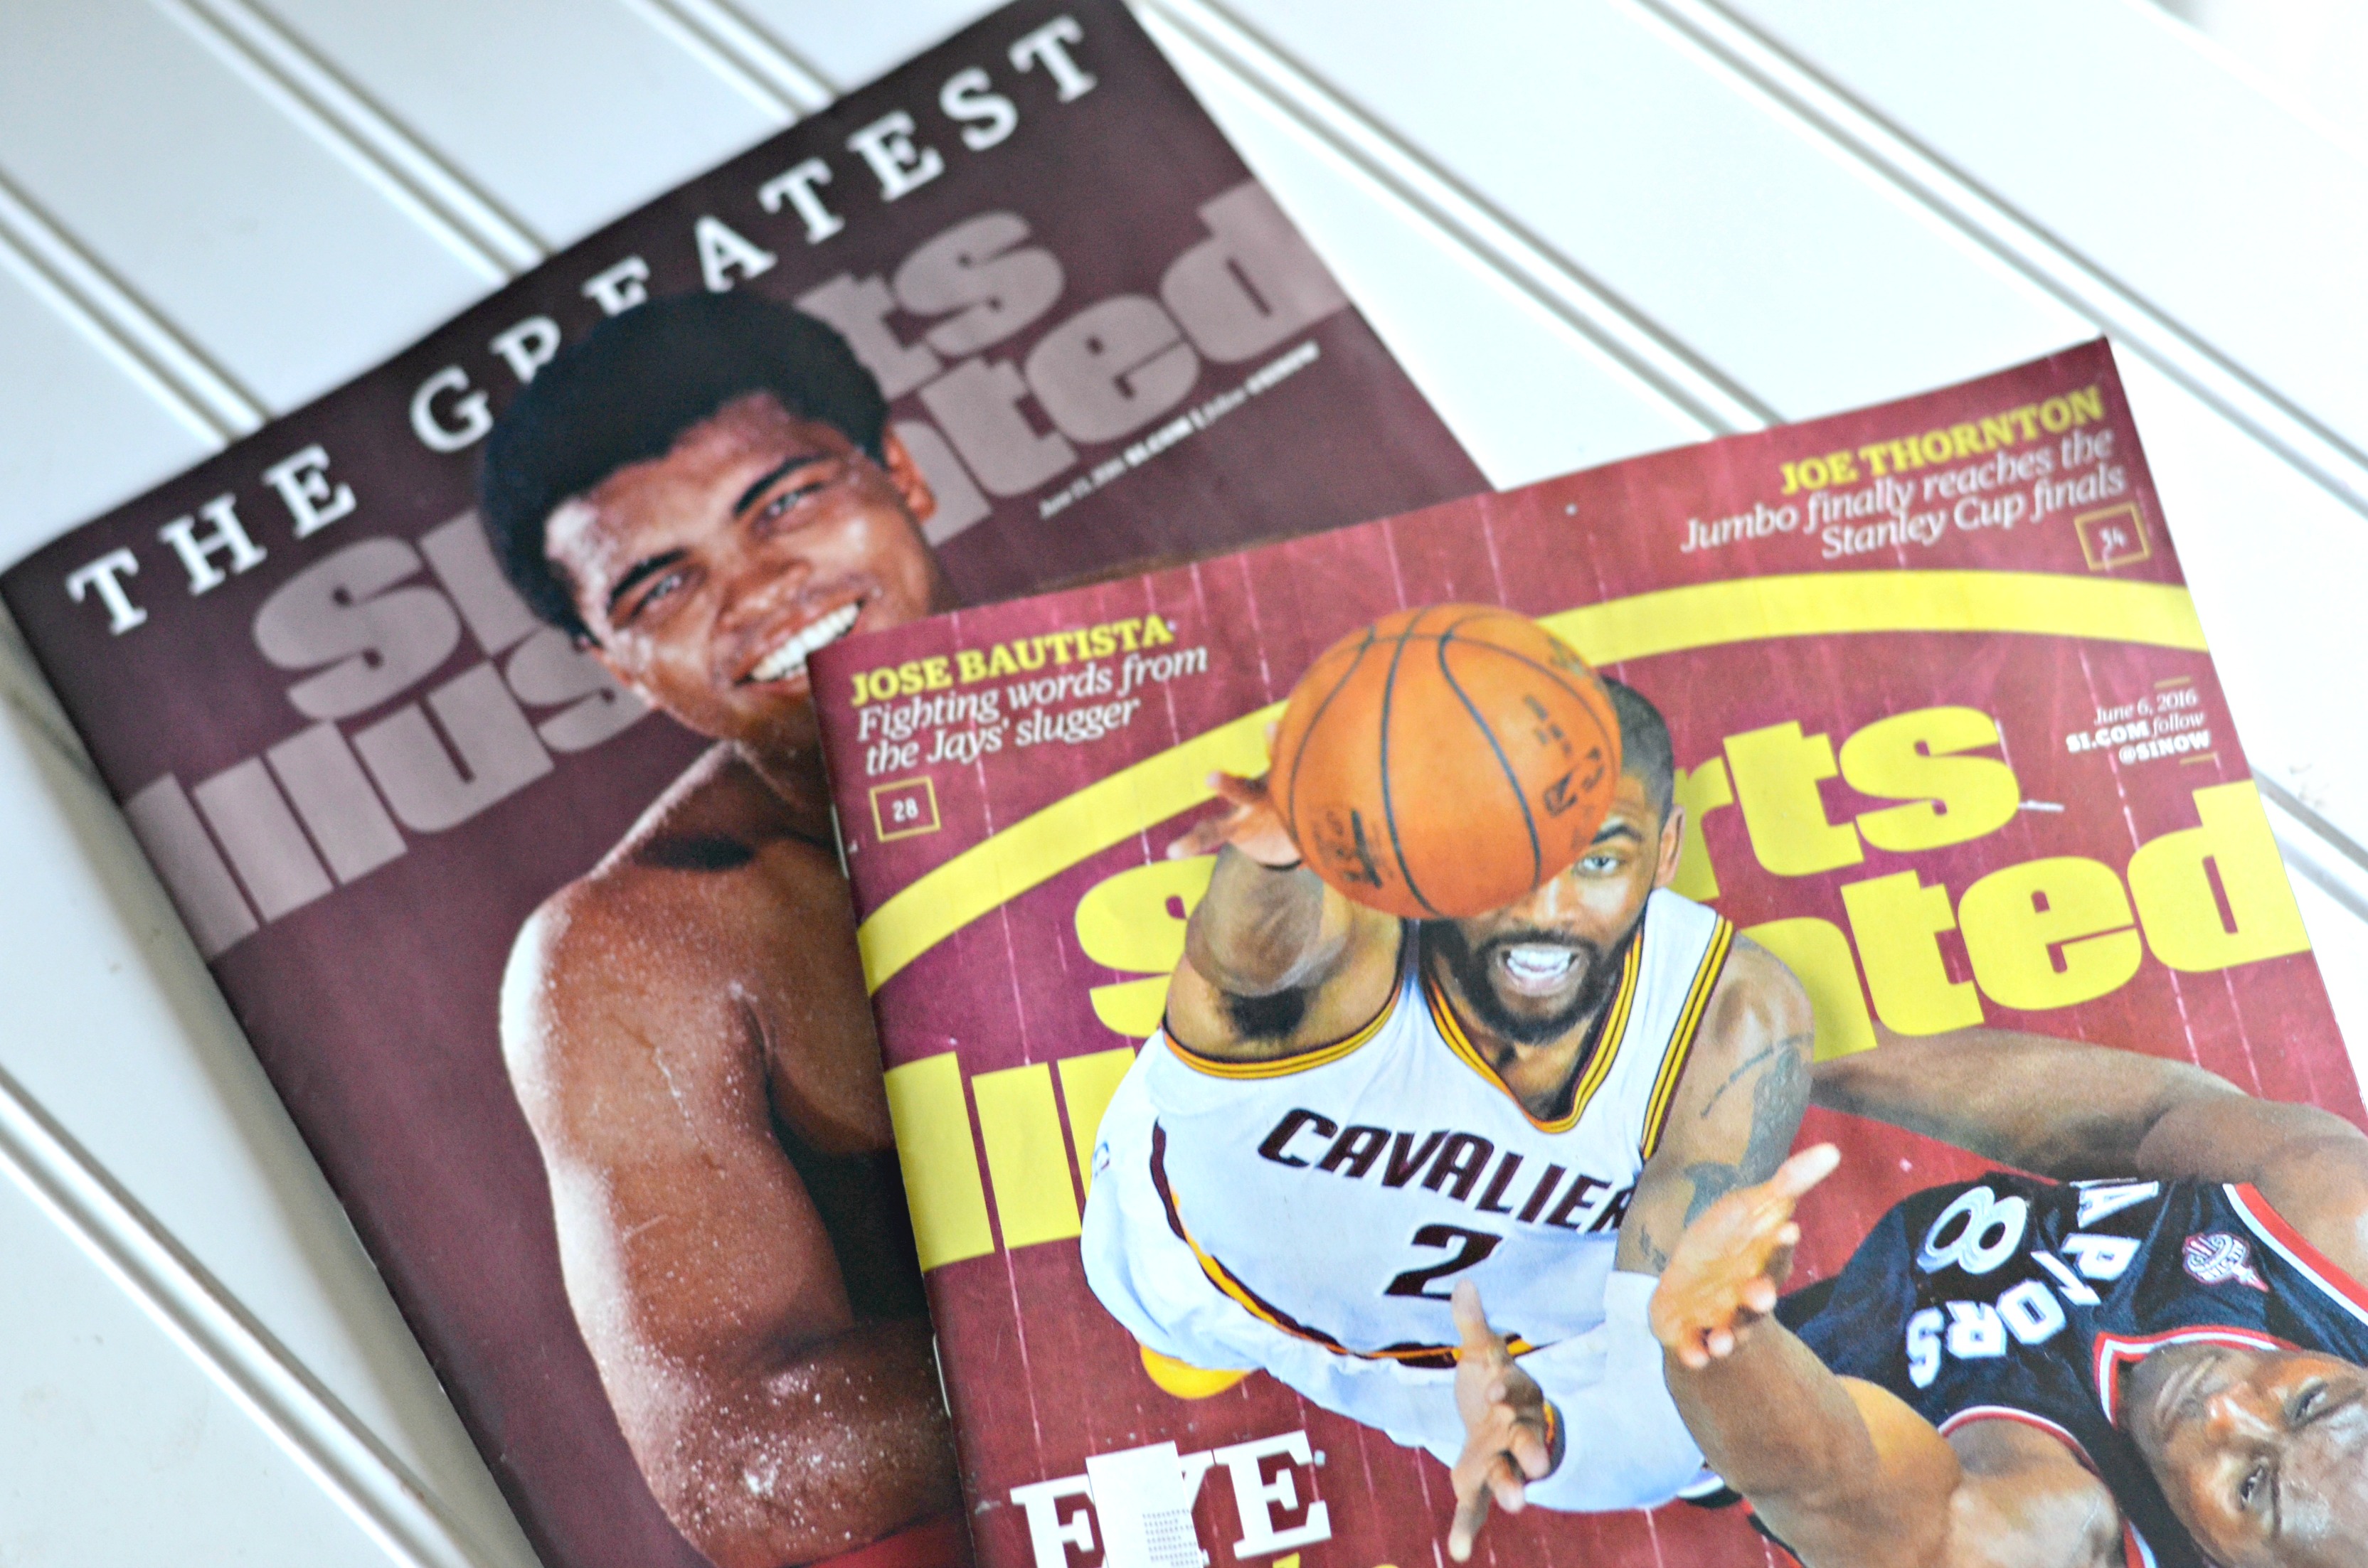 No-cost magazine deal on magazines like O, People, and (pictured) Sports Illustrated